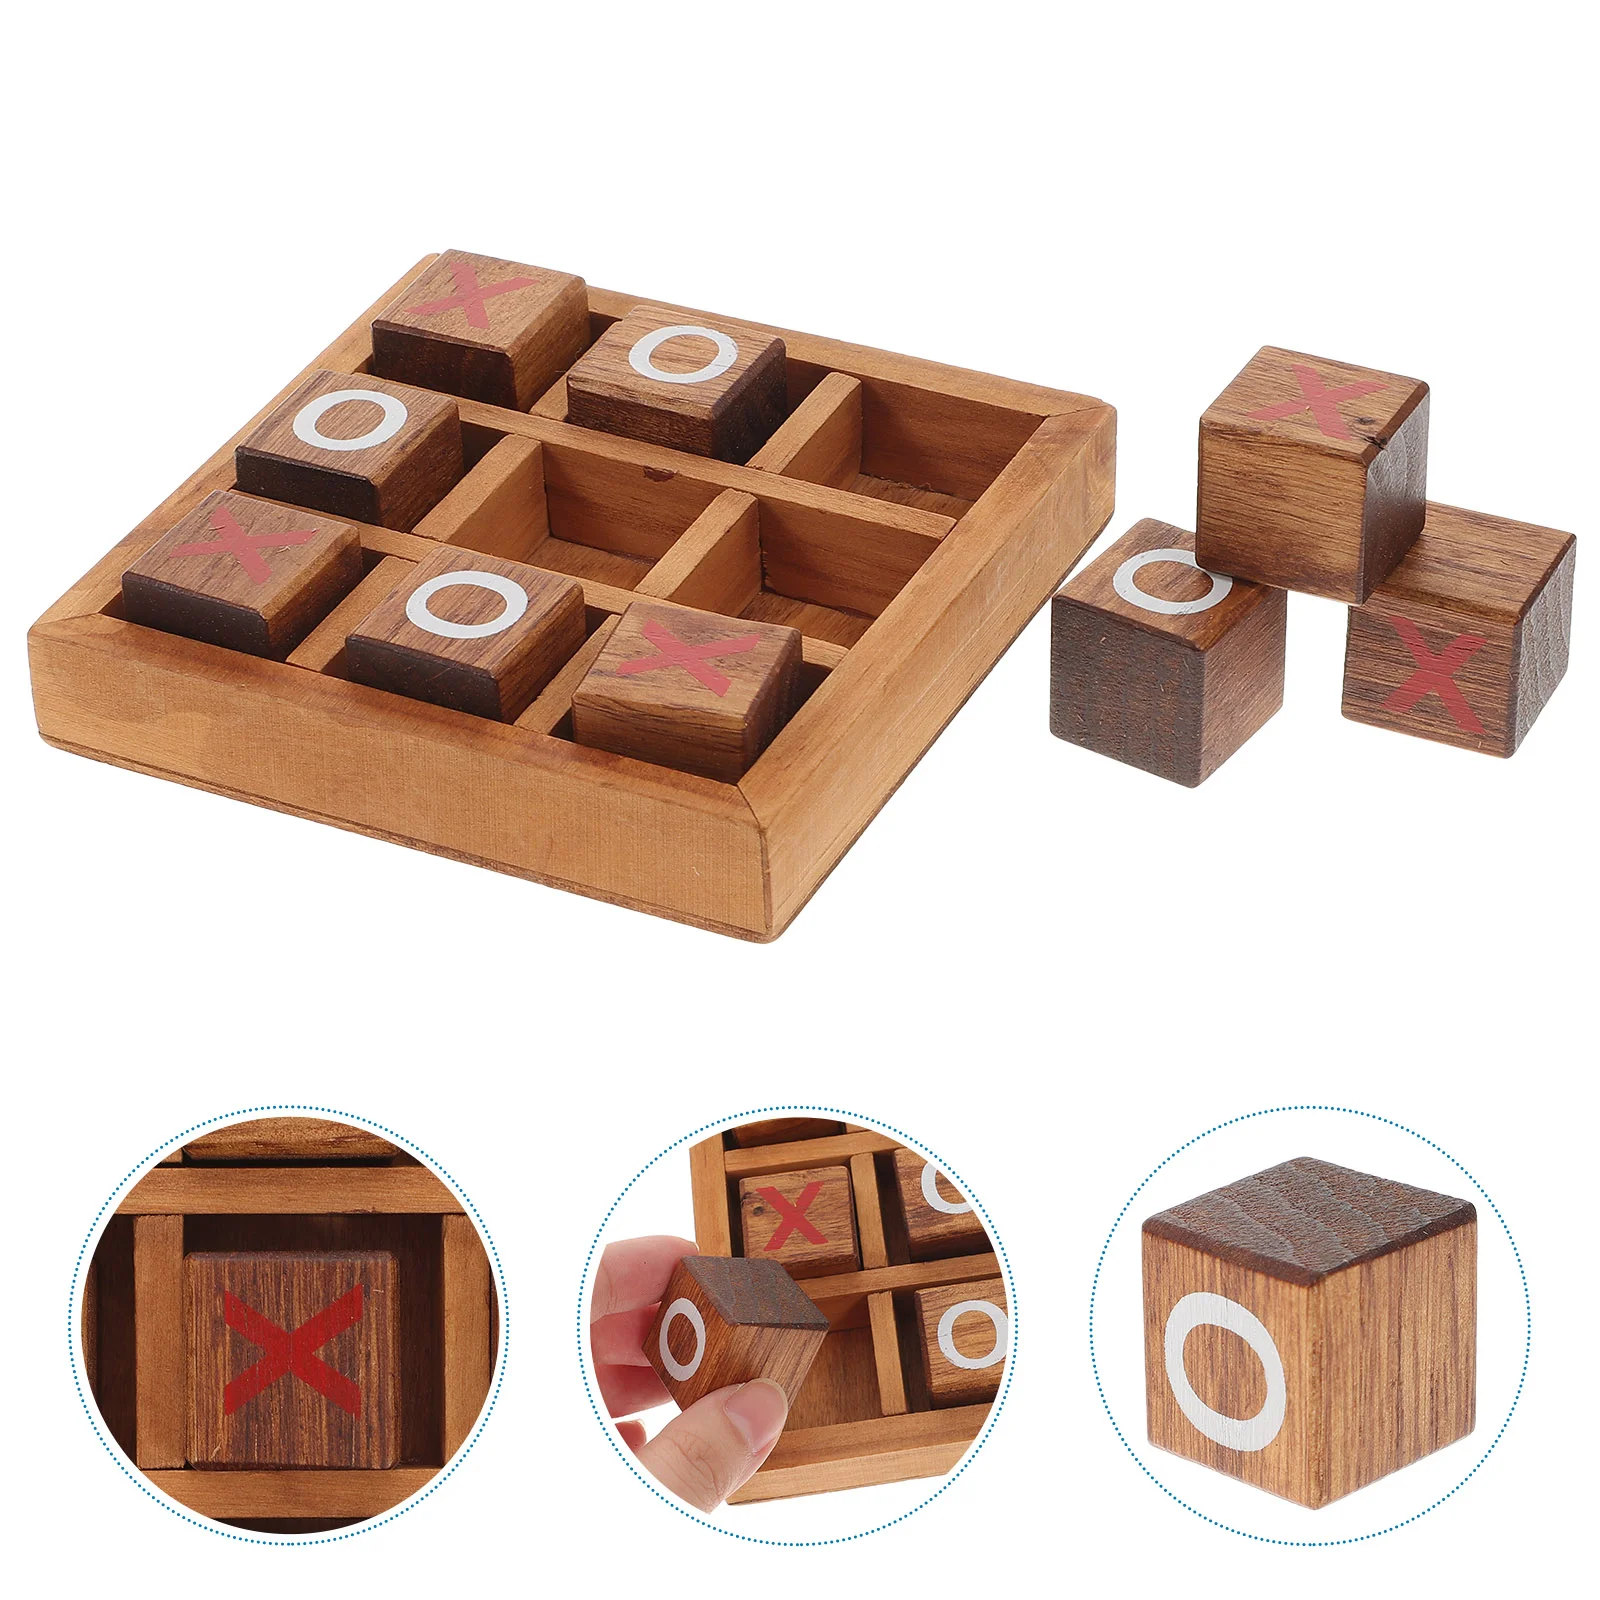 

Xo Chess Children's Toys Wooden Toe -Toe Board Game TicTacToe Interactive Brain Teaser Puzzles Games for the whole family Table